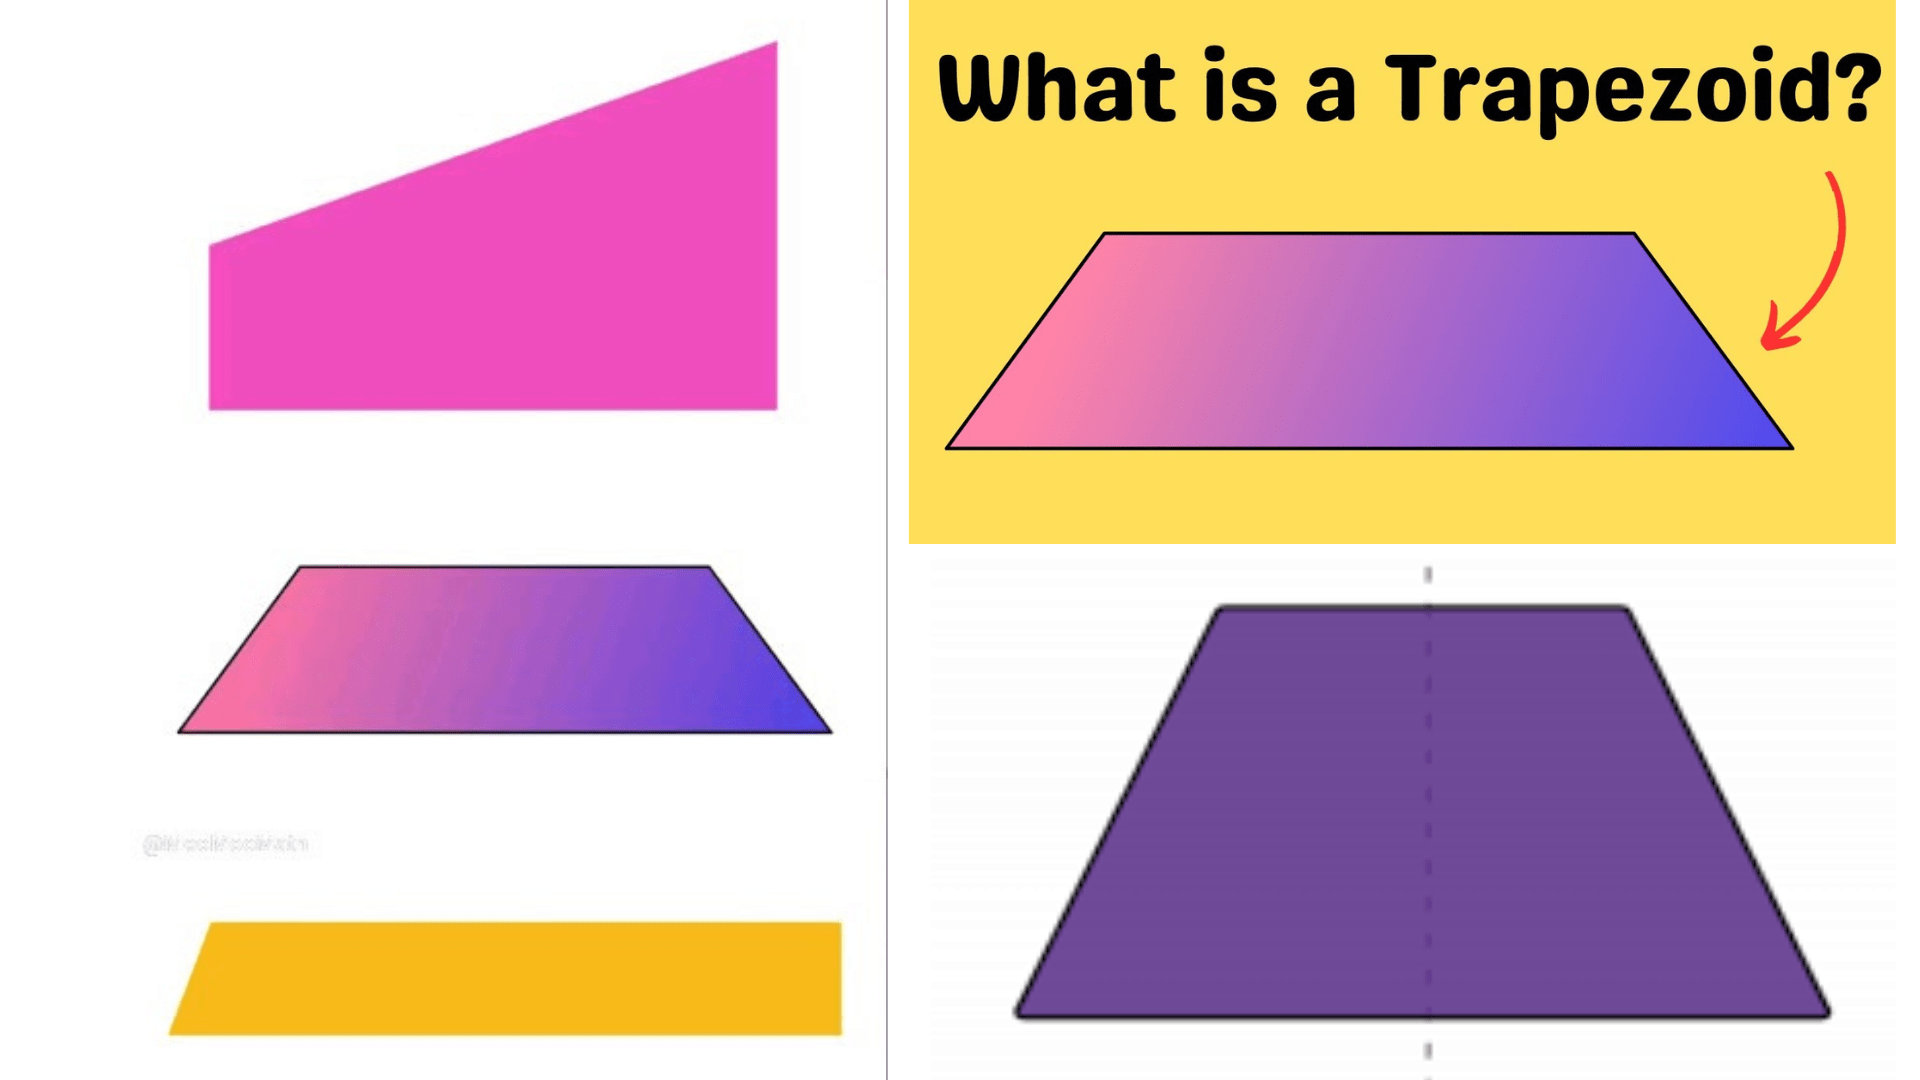 What Is a Trapezoid